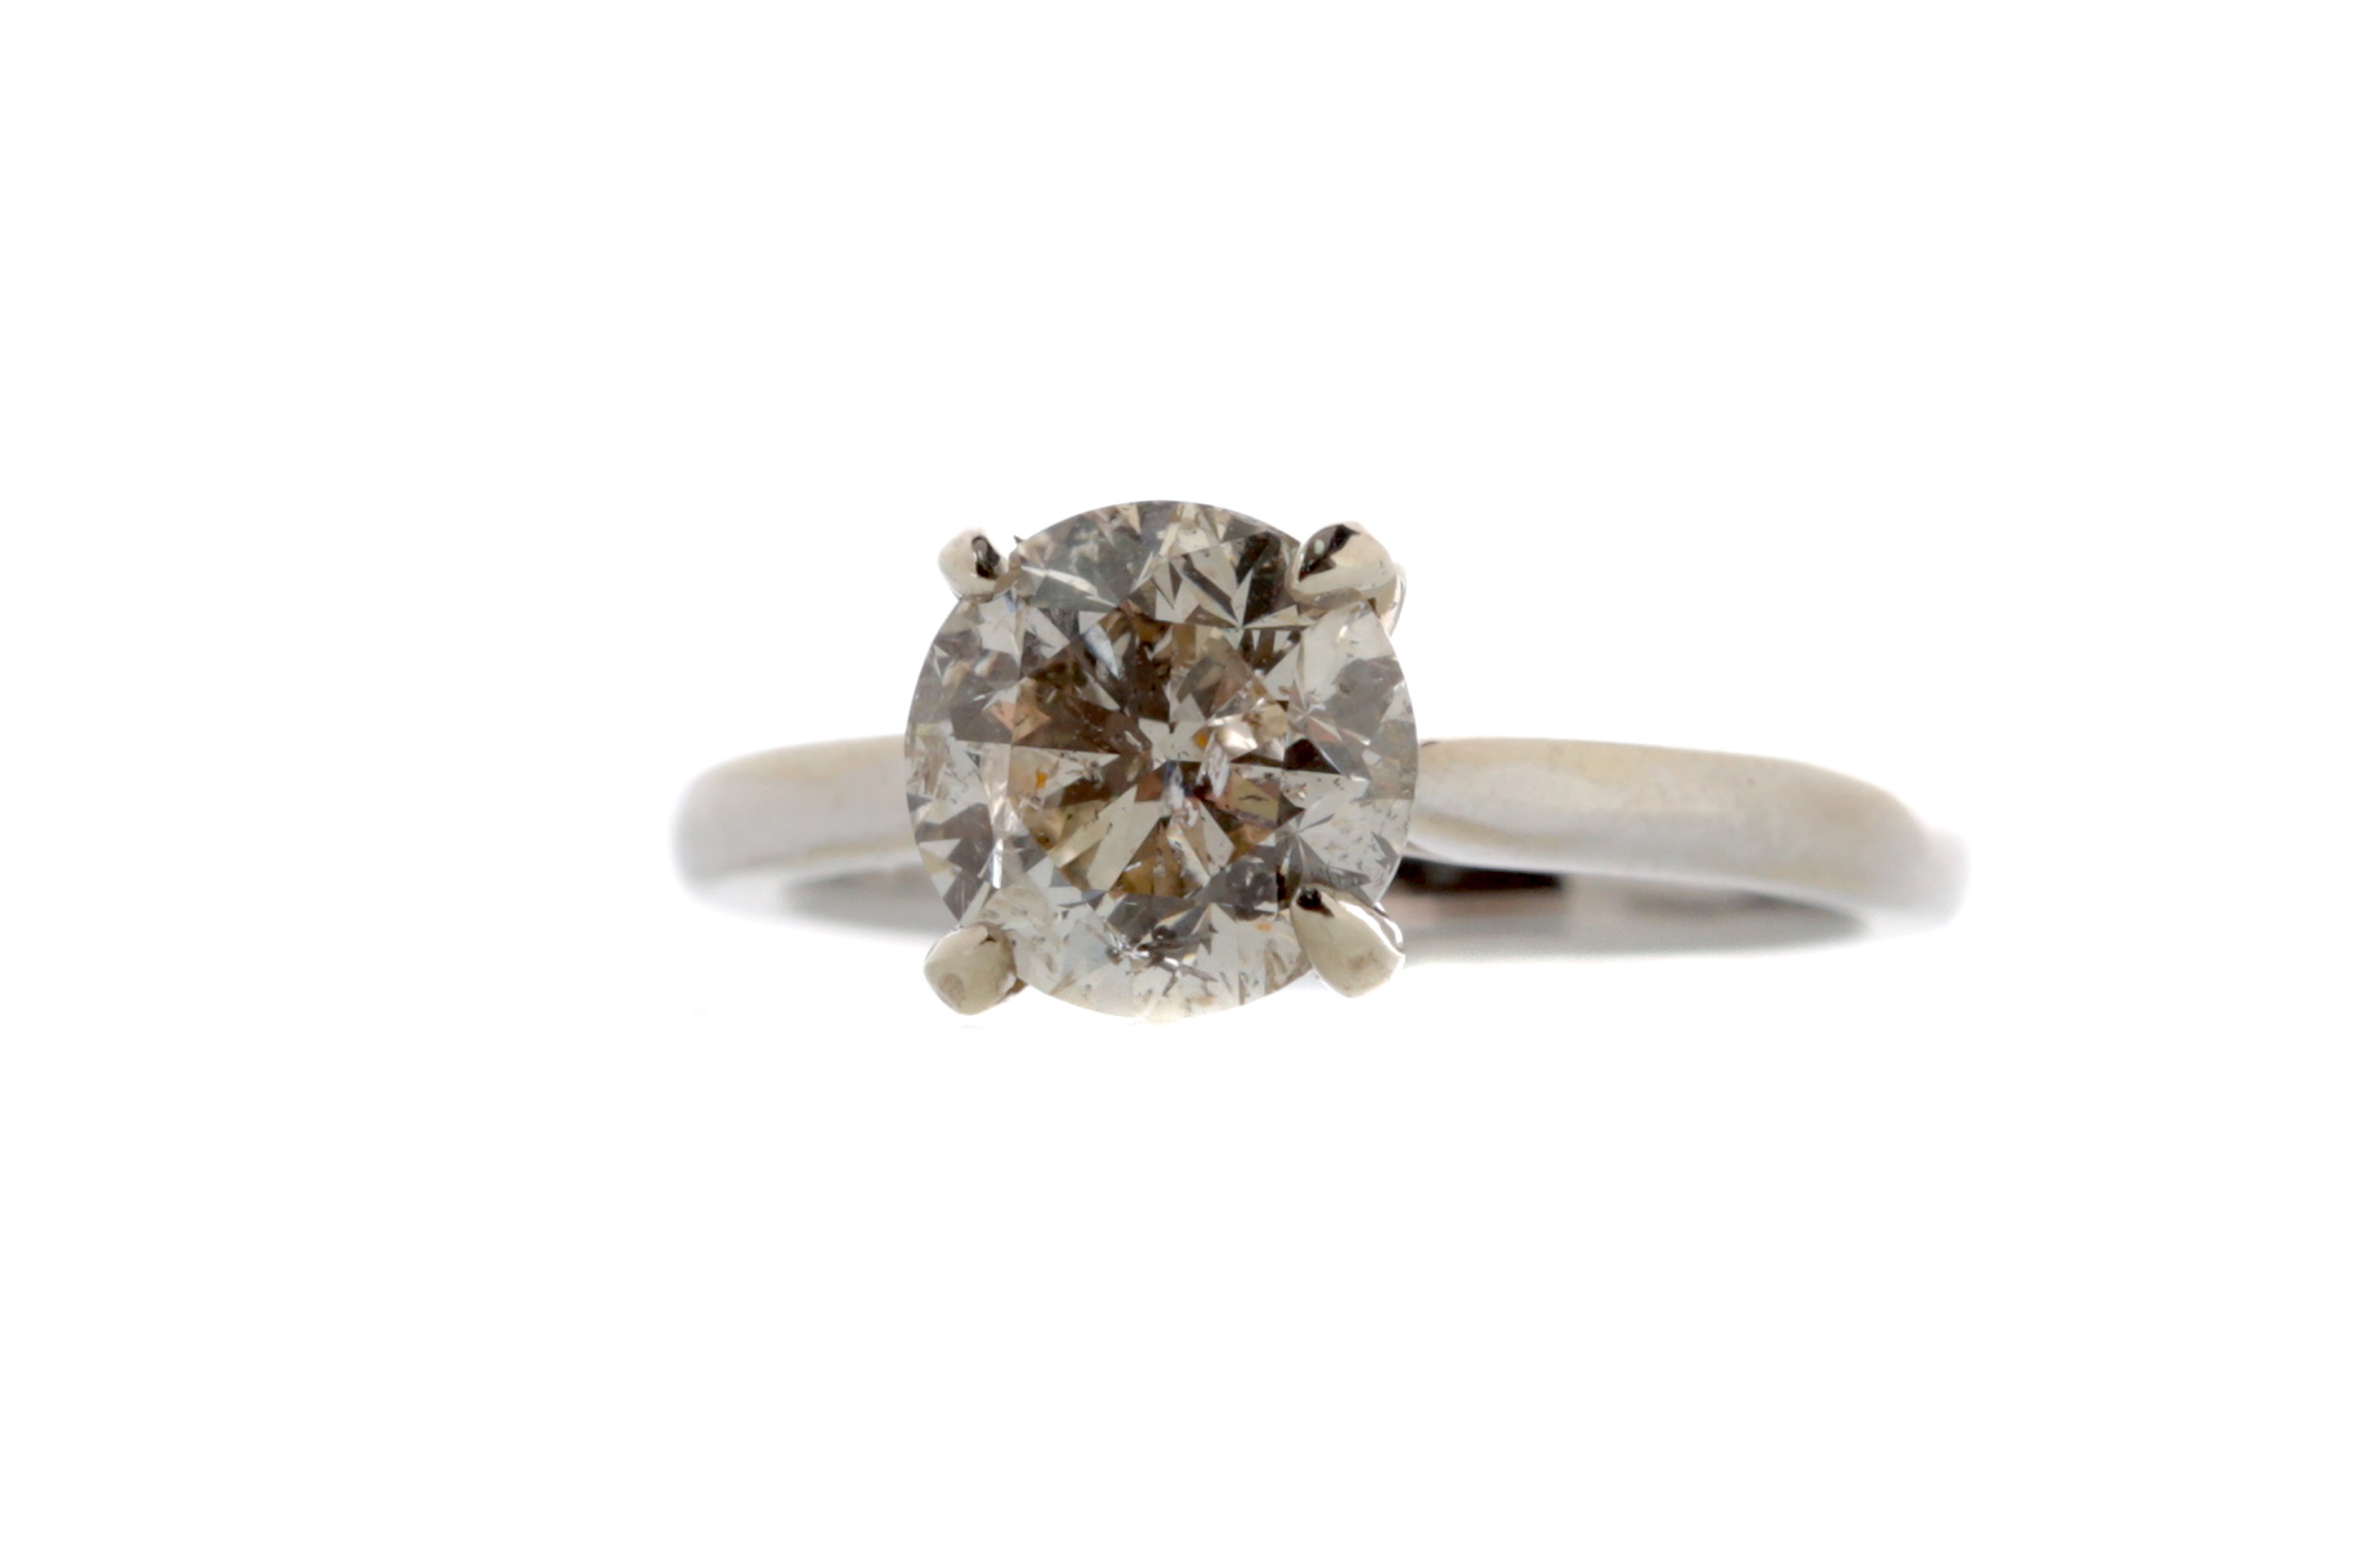 A DIAMOND SOLITAIRE RING - Image 2 of 2